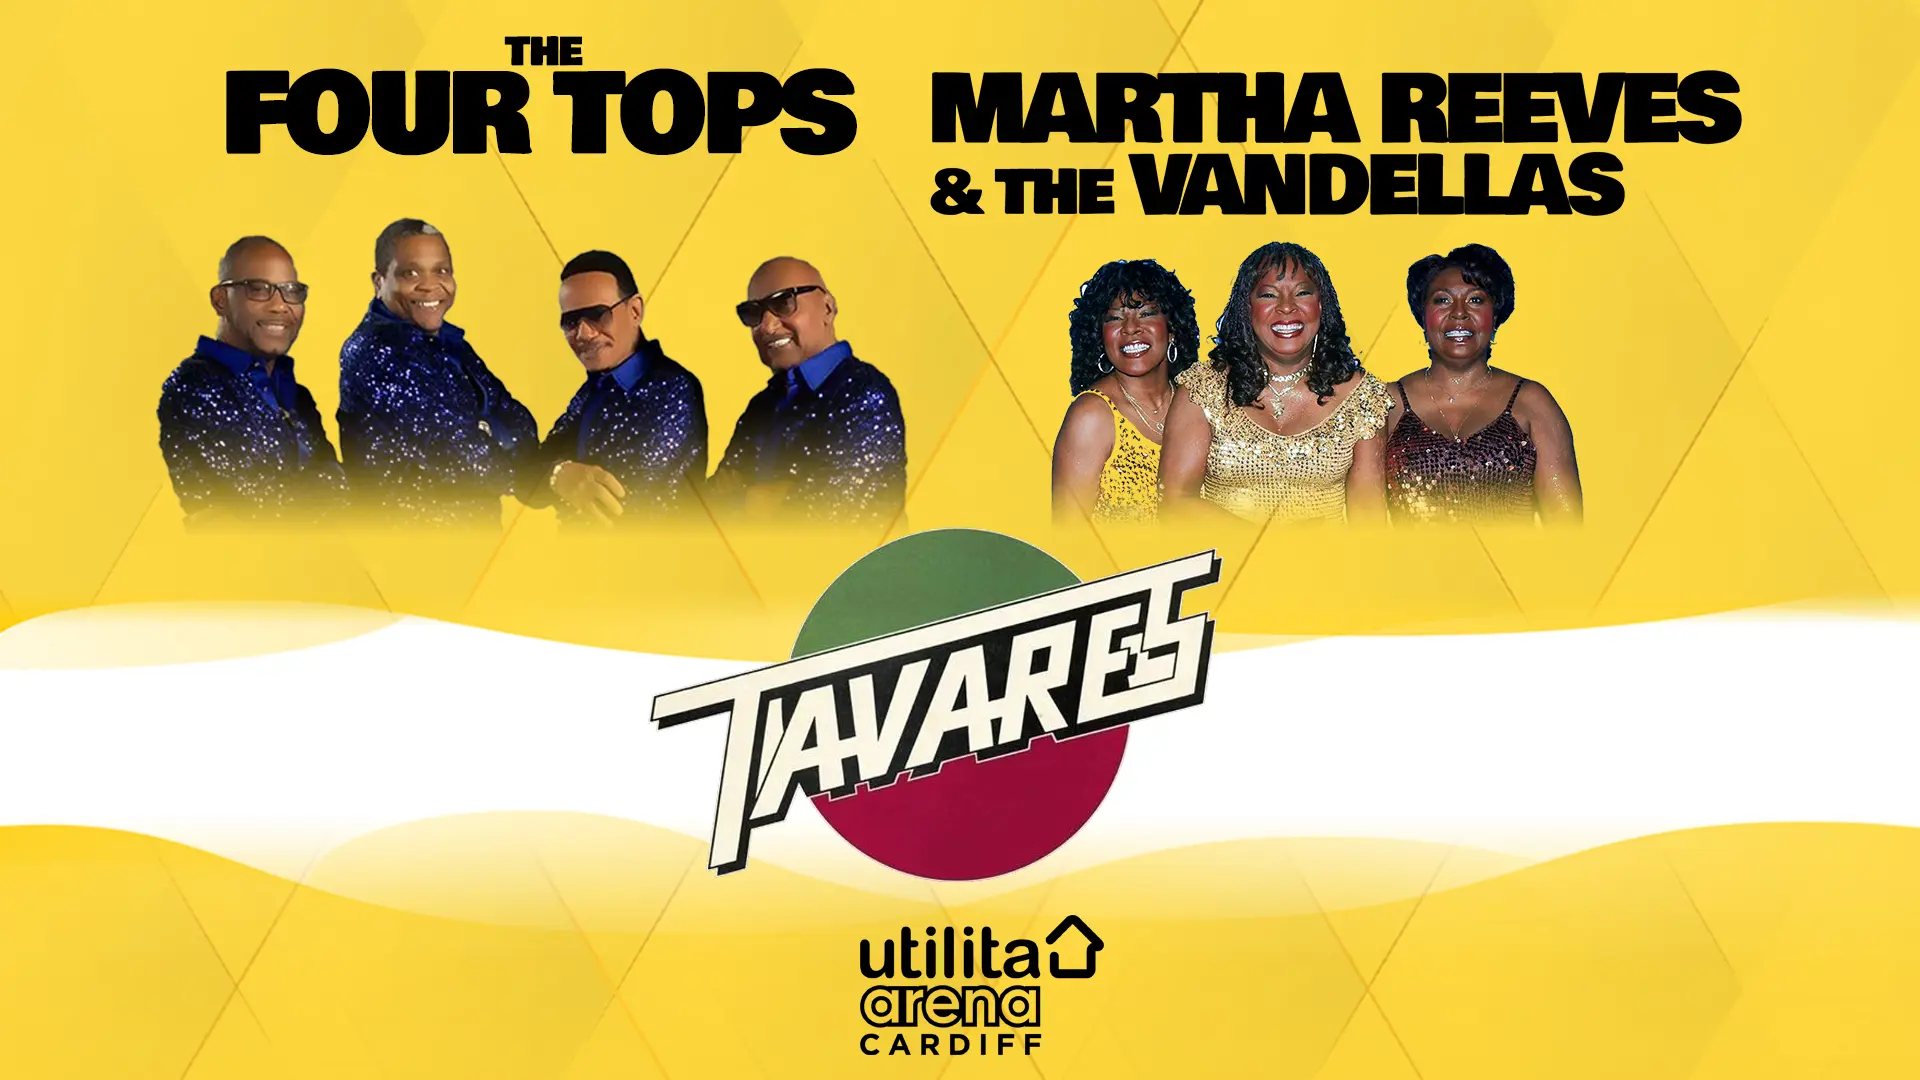 The Four Tops, Martha Reeves & The Vandellas and Tavares